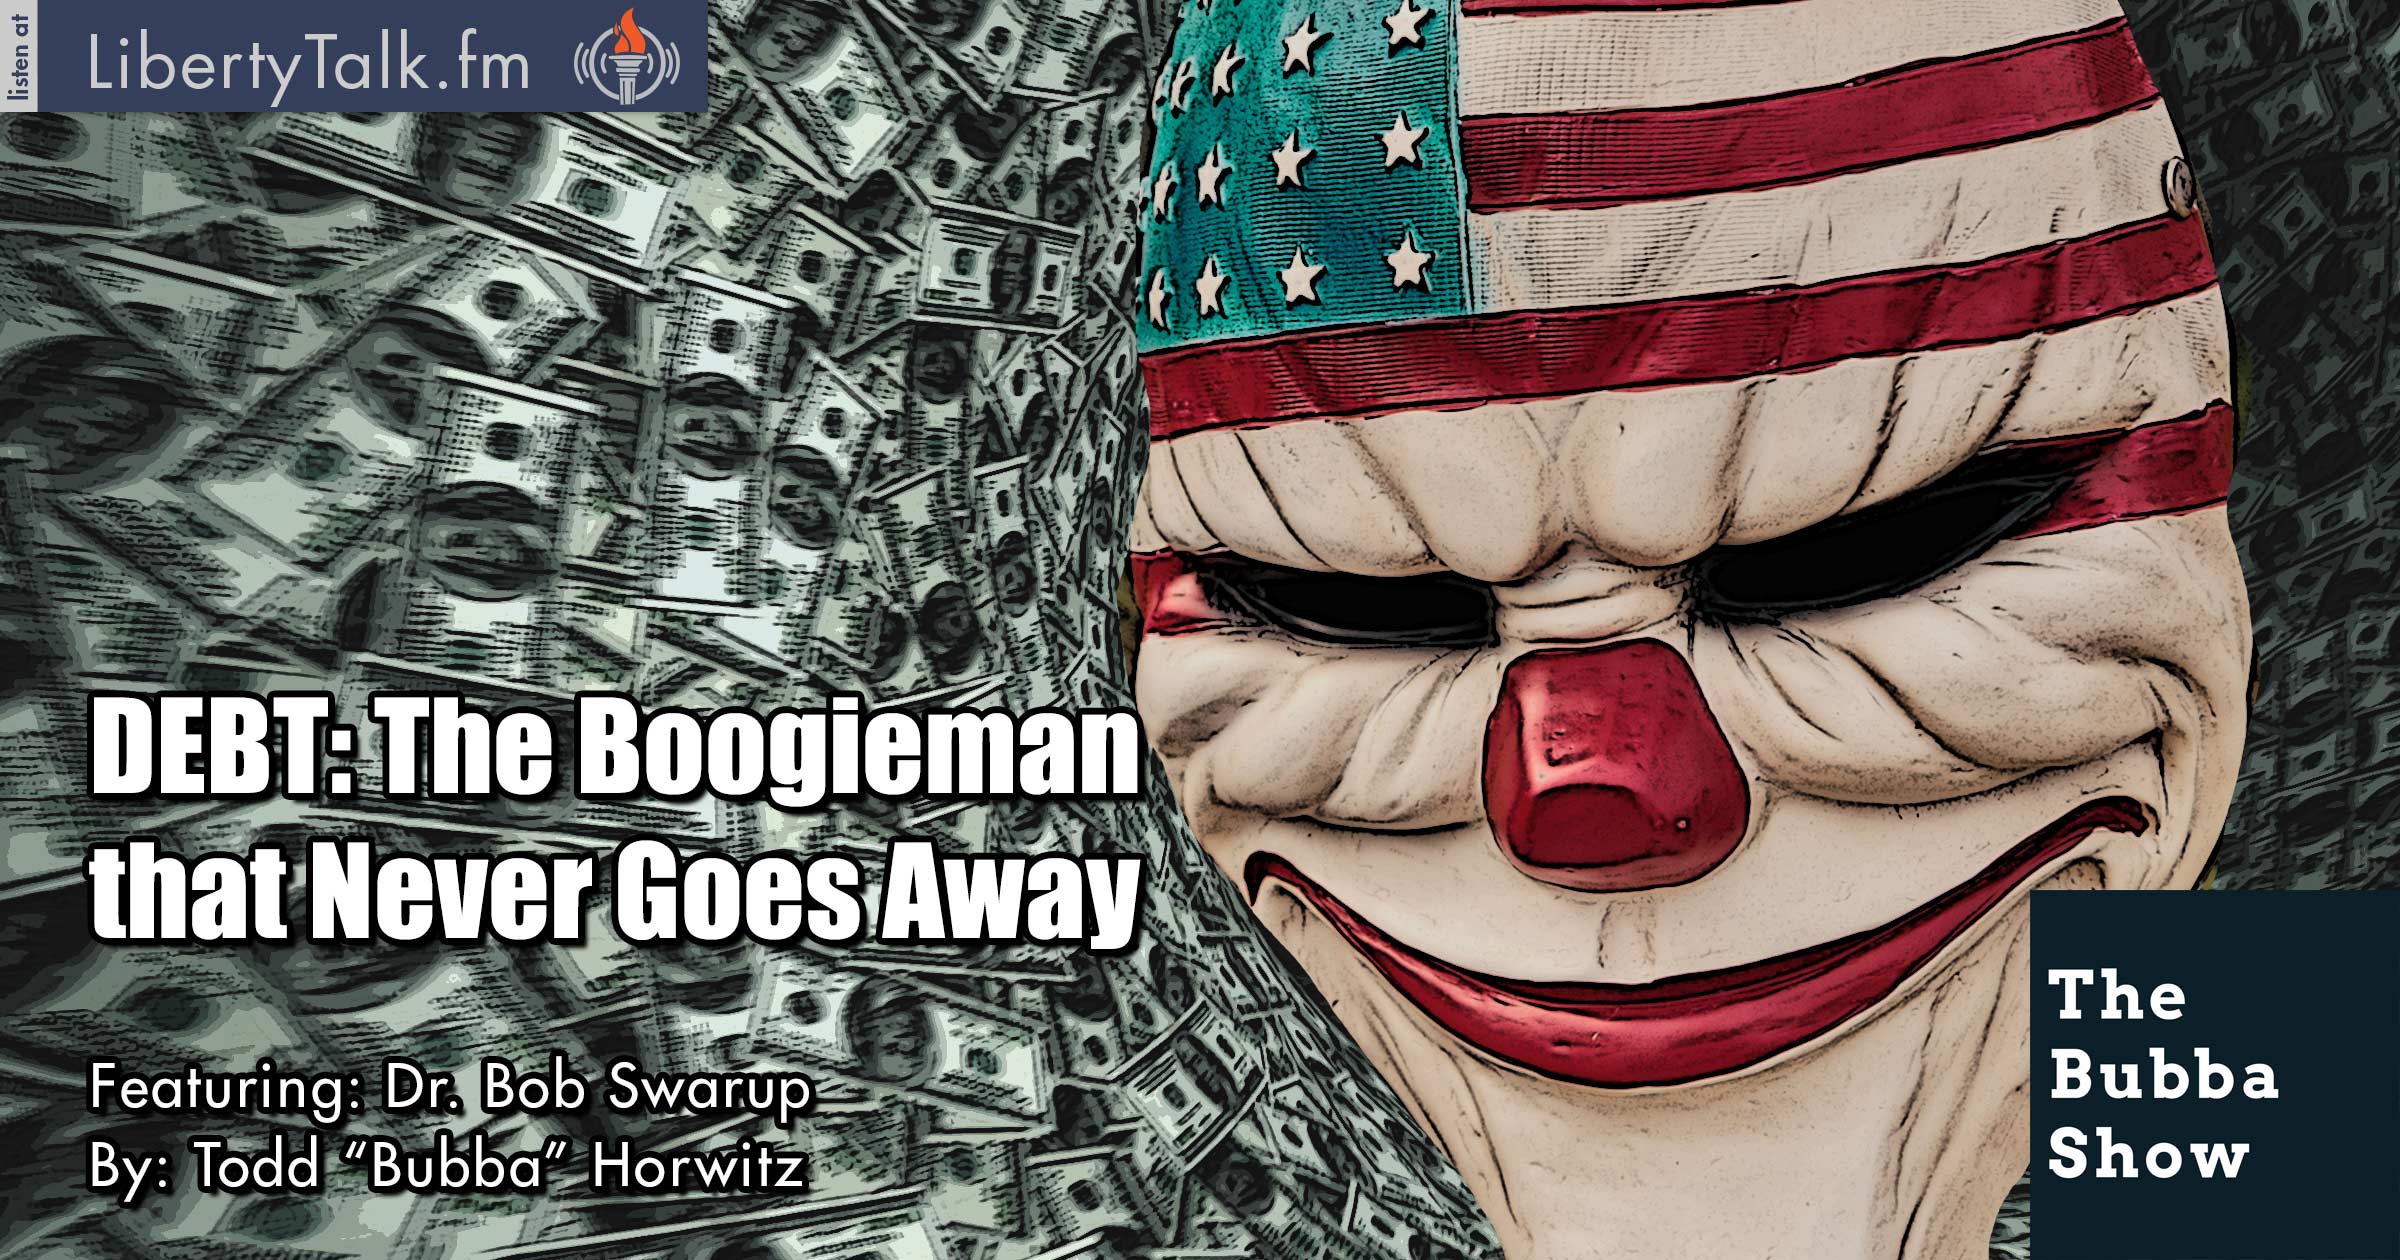 BDebt: The Boogieman that Never Goes Away
 - The Bubba Show